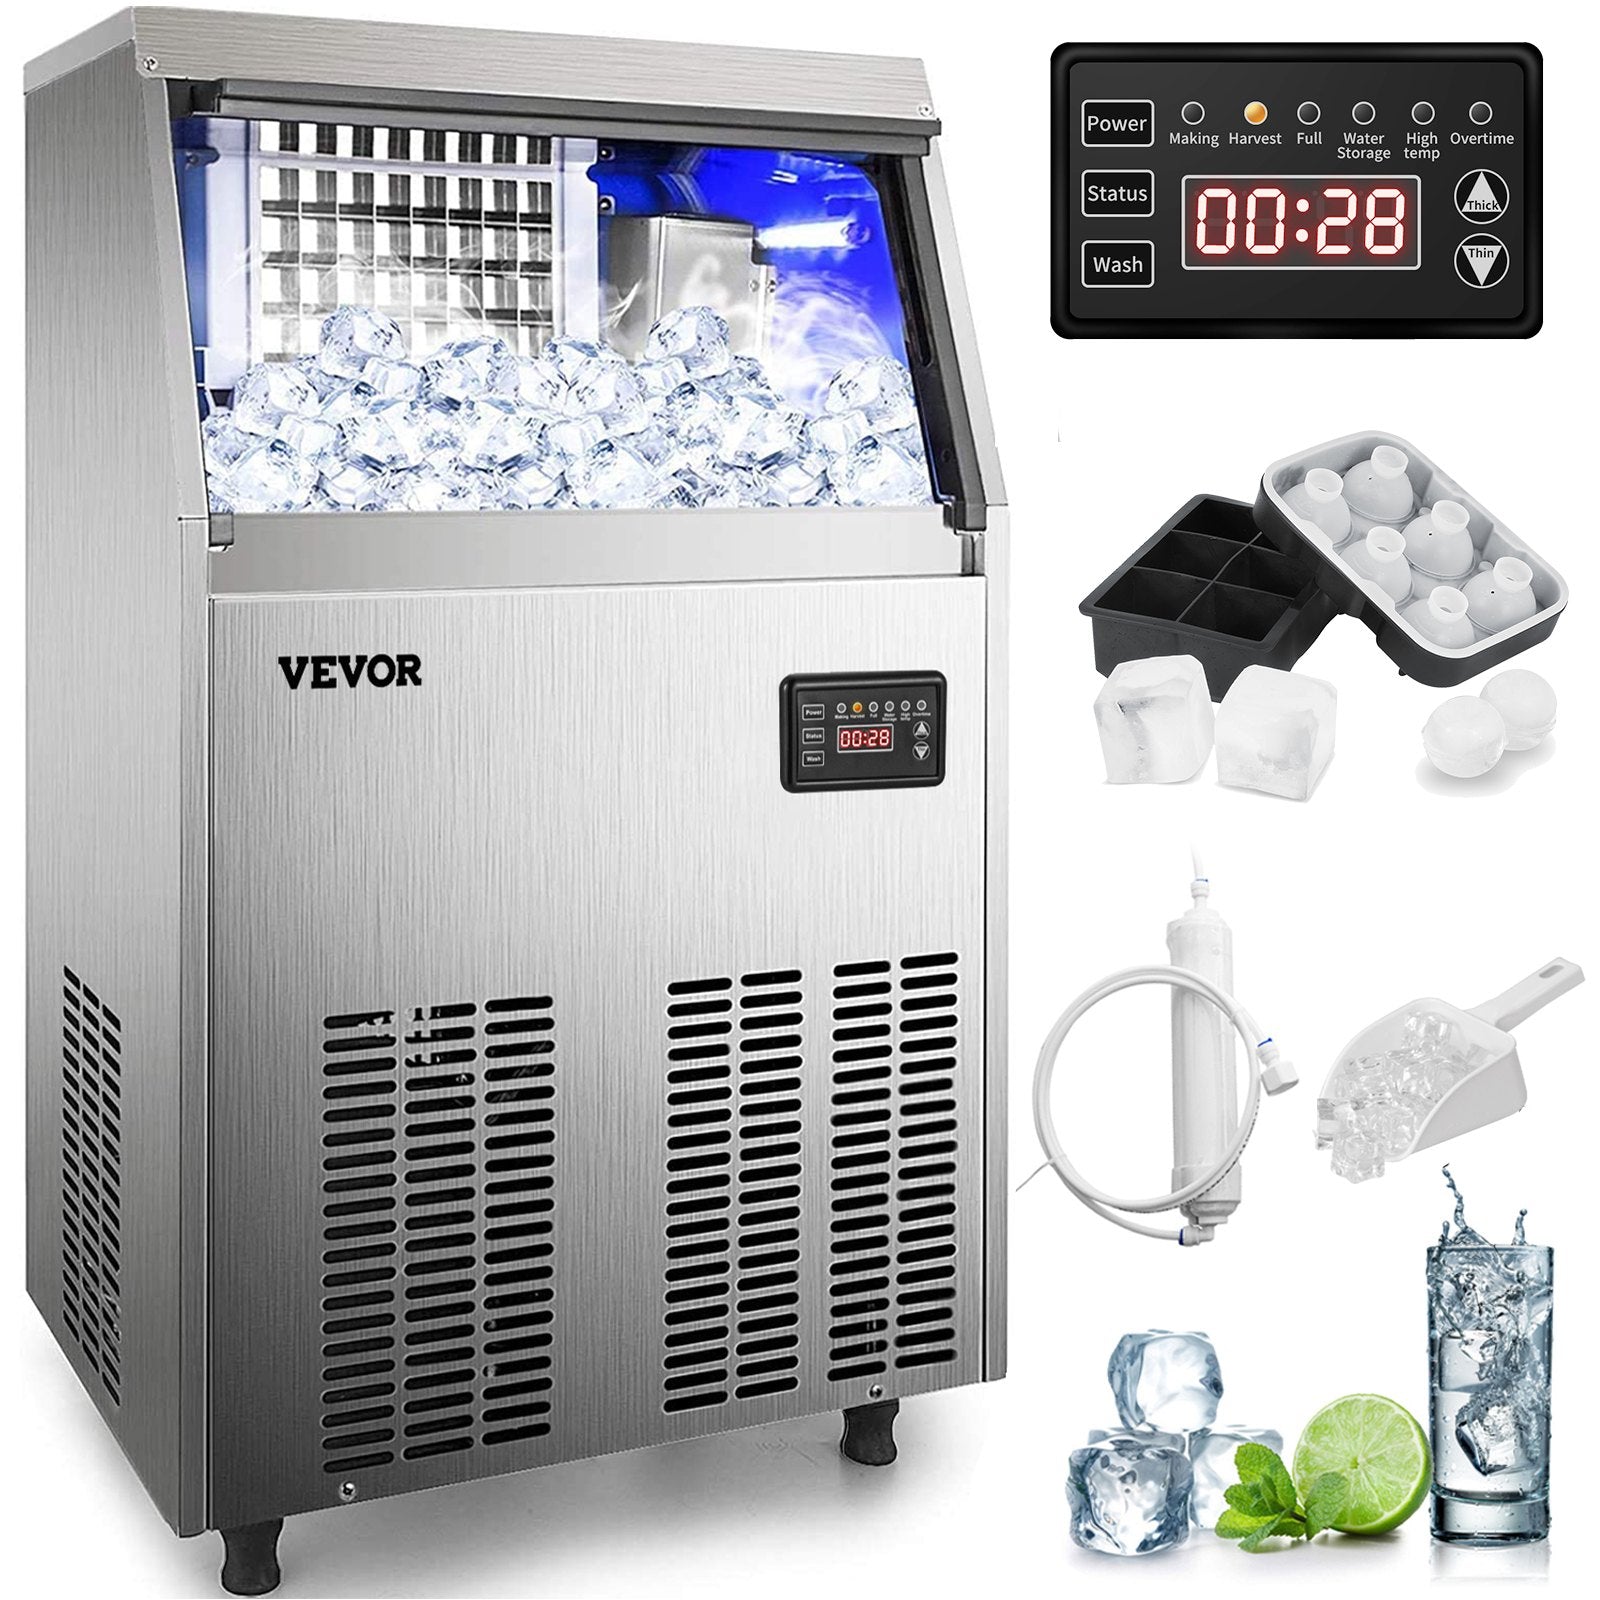 VEVOR 110V Commercial Ice Maker 110LBS/24H with 44lbs Storage Capacity Stainless Steel Commercial Ice Machine 40 Ice Cubes Per Plate Industrial Ice Maker Machine Auto Clean for Bar Home Supermarkets-6